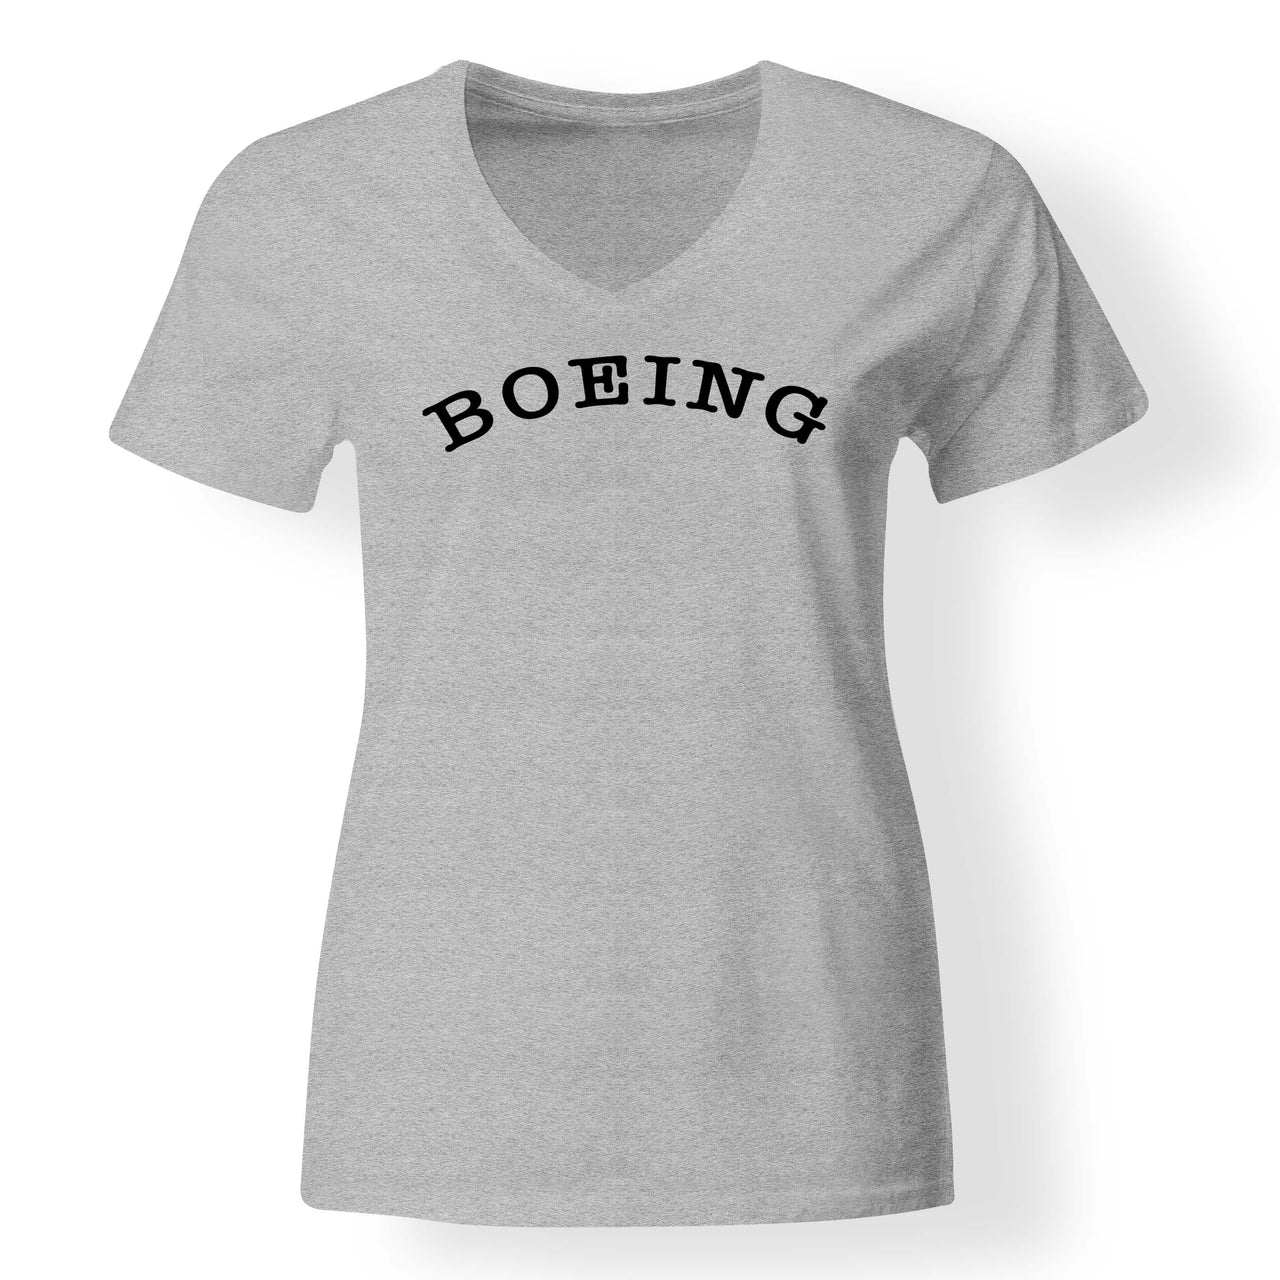 Special BOEING Text Designed V-Neck T-Shirts